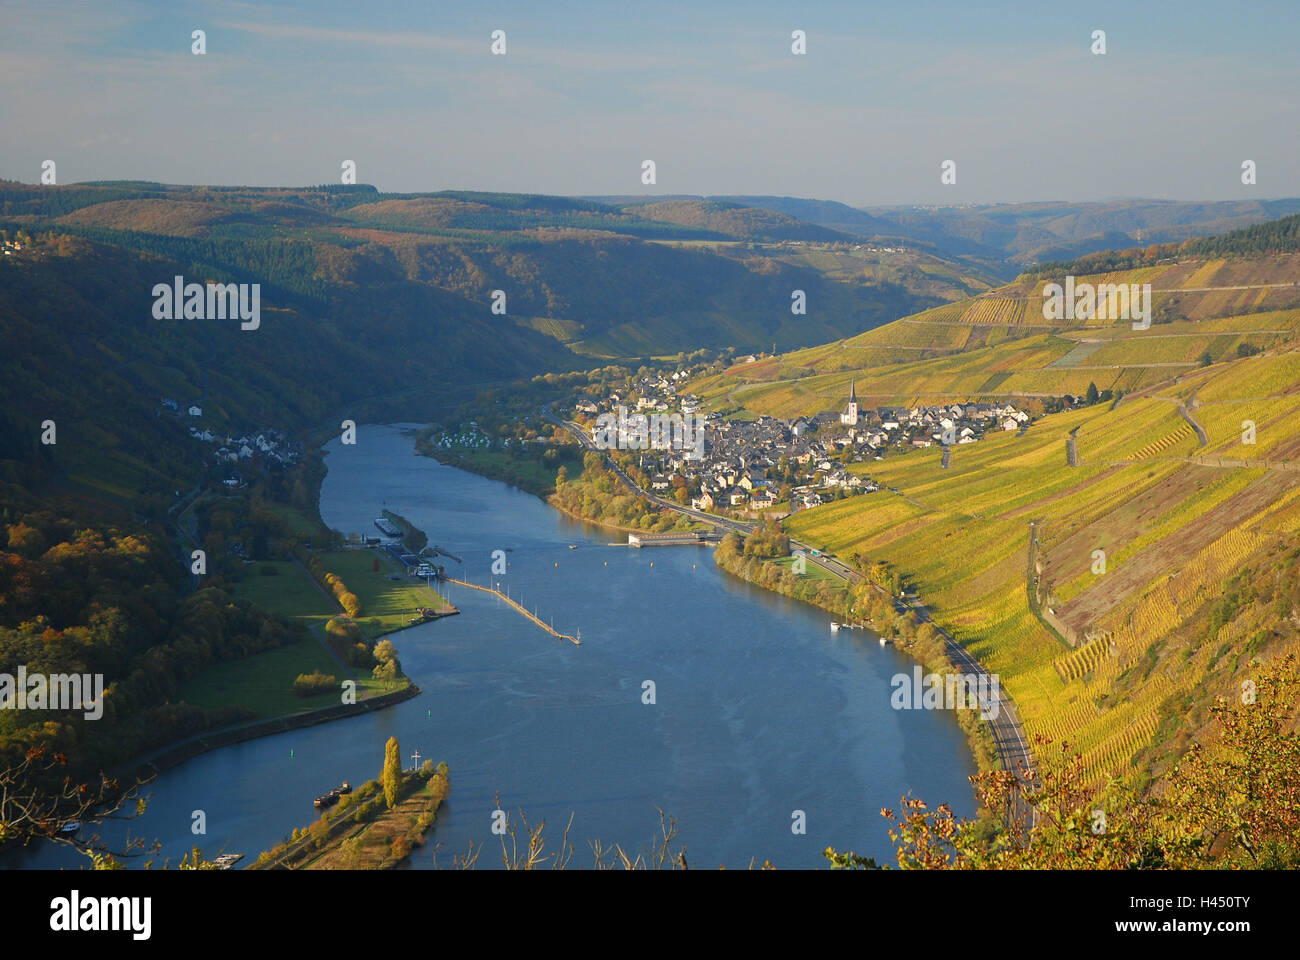 Germany, Rhineland-Palatinate, the Moselle, Traben-Trarbach, view from the castle Greven, vineyards, autumn, Stock Photo